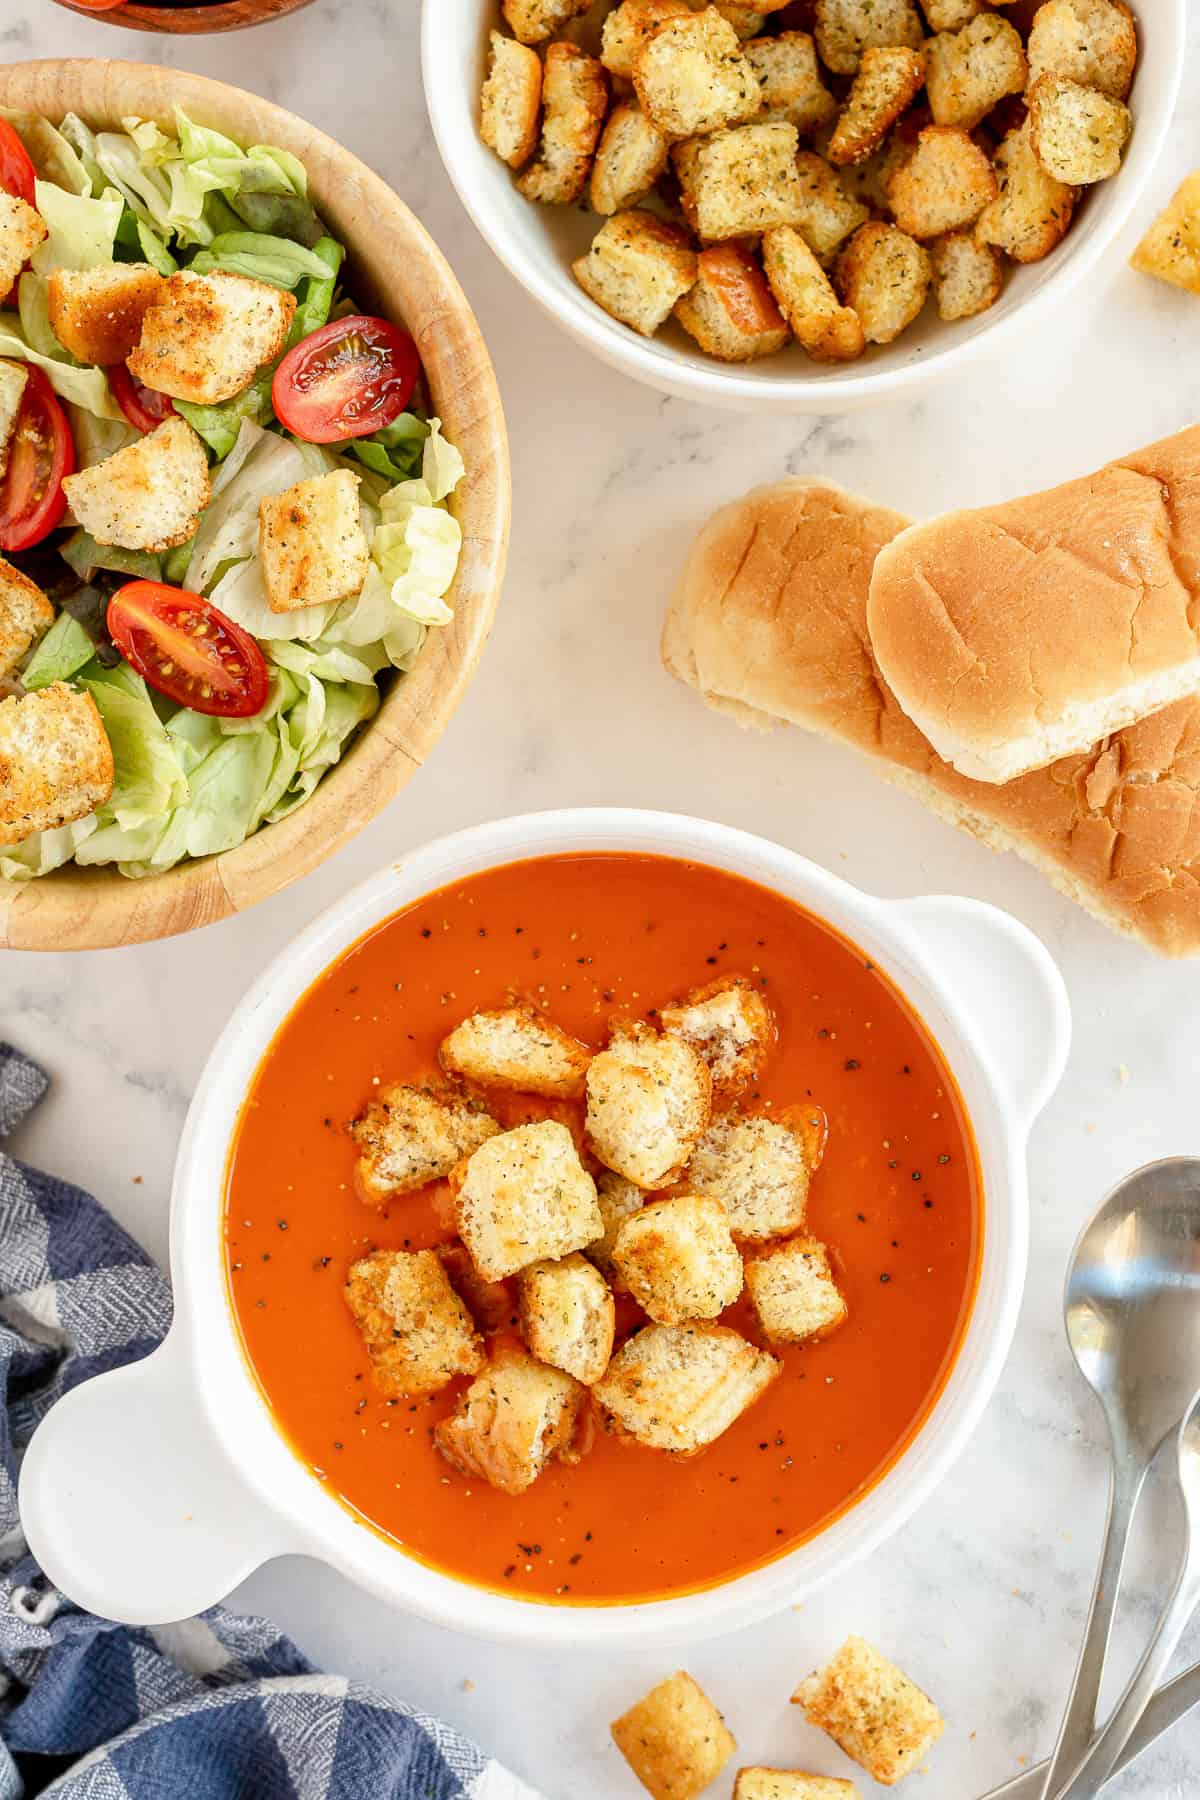 An over the top shot of a bowl of tomato soup with croutons.